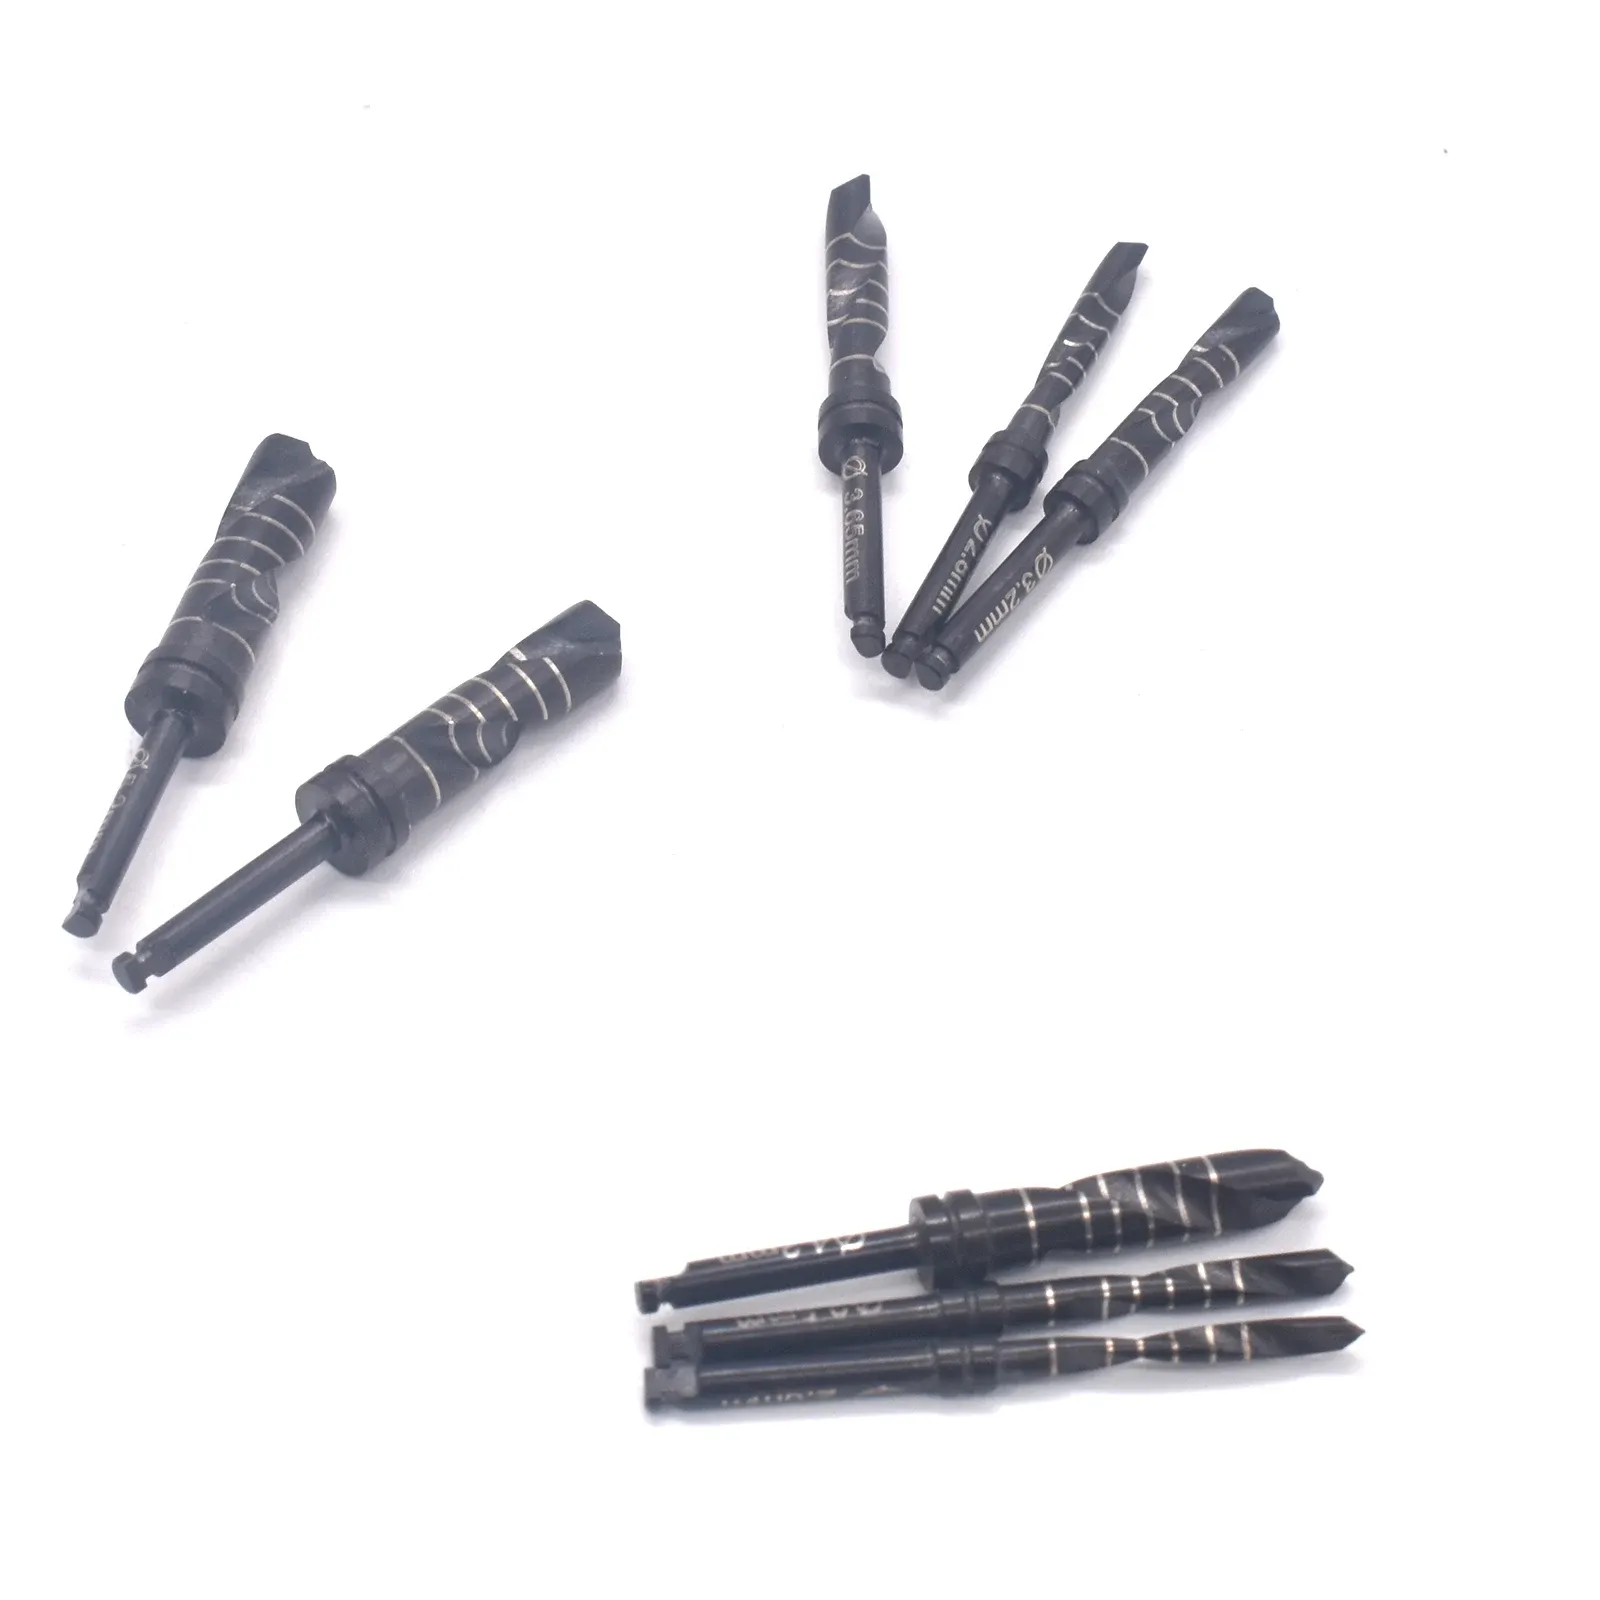 1pc Dental Implant Drills Titanium Coated Black Reaming Drill Surgical Tools 2.0mm/2.5mm/2.8mm/3.2mm/3.65mm/4.2mm/4.8mm/5.2mm